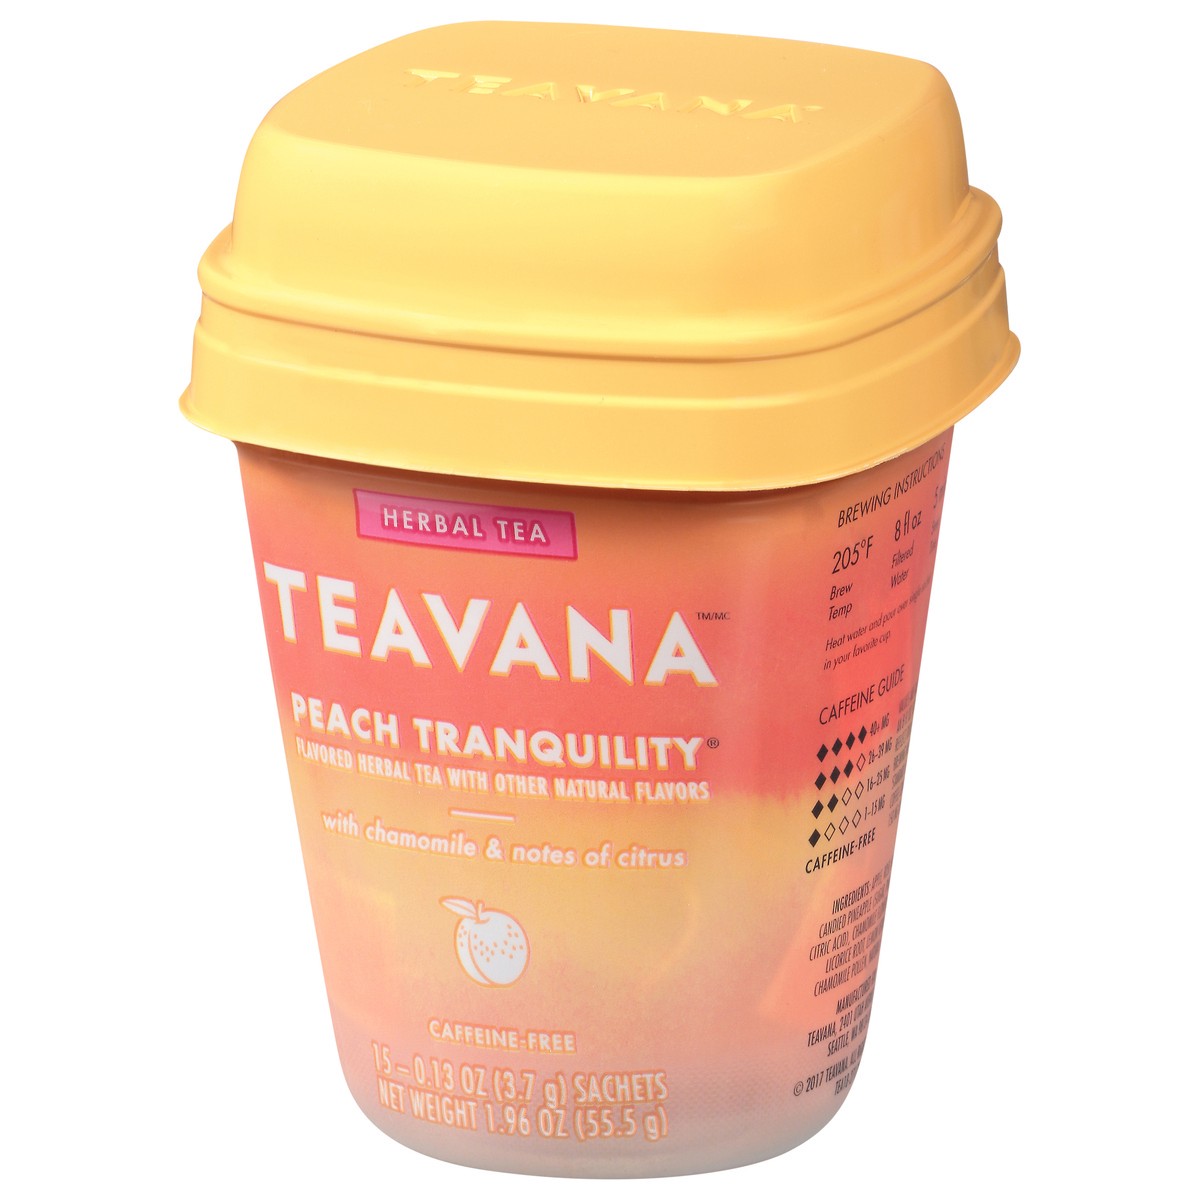 slide 2 of 13, Teavana Peach Tranquility, Herbal Tea With Chamomile and Notes of Citrus, 15 Sachets, 1.96 oz